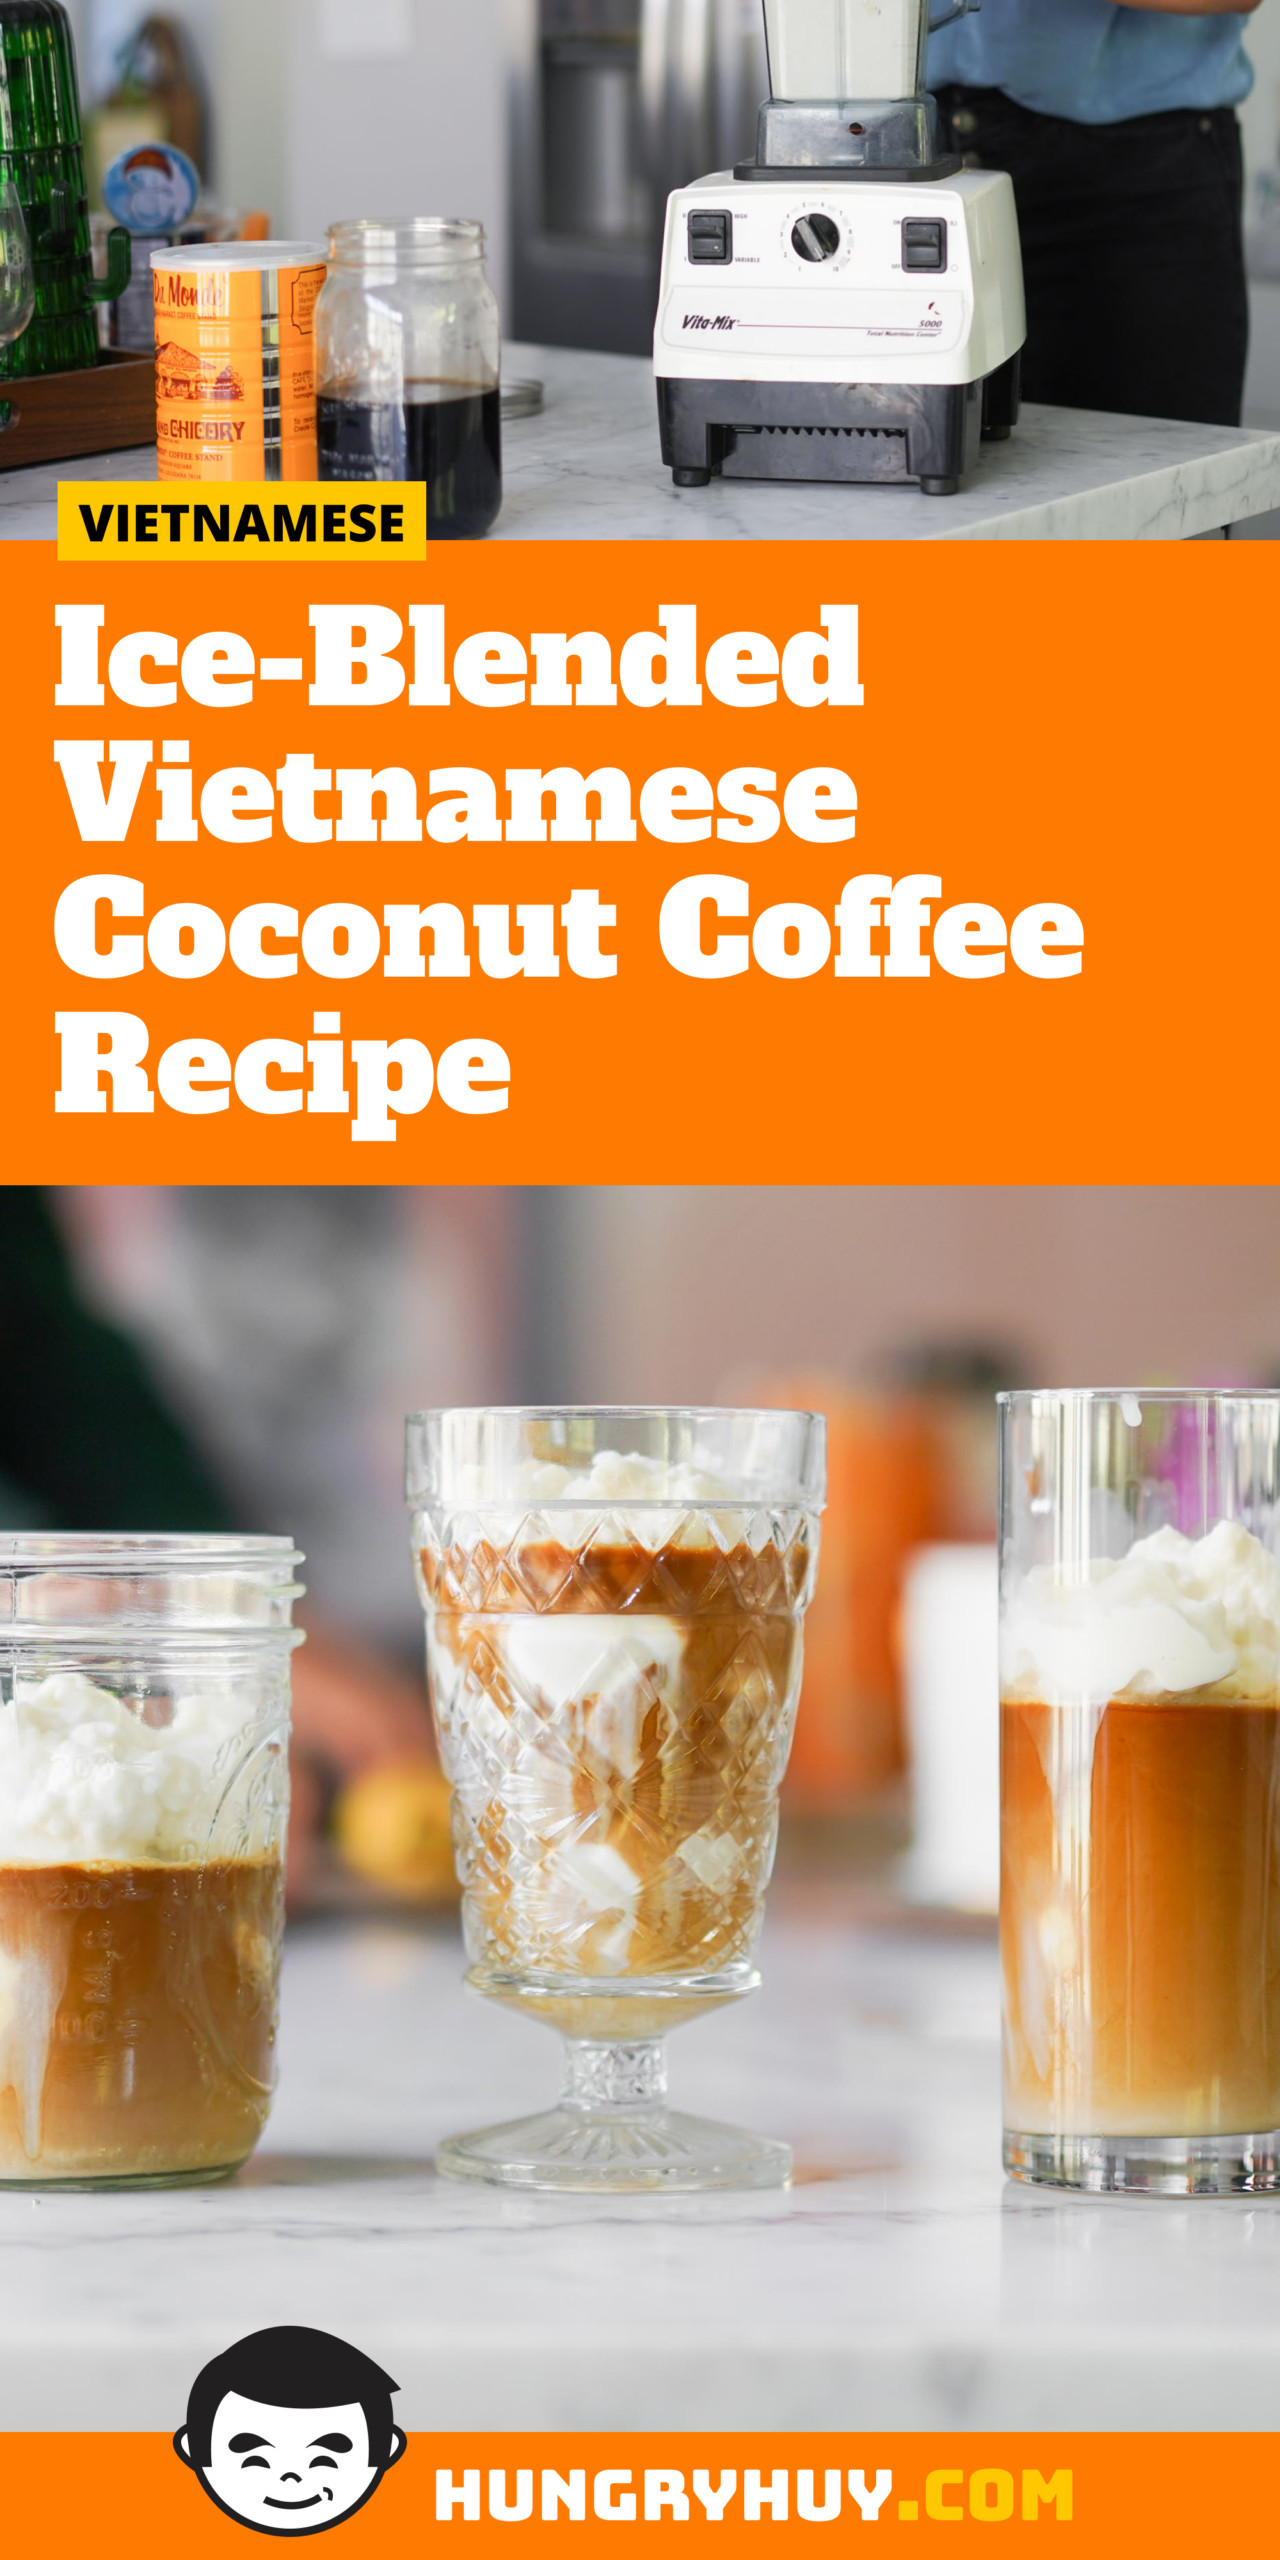 Ice-Blended Vietnamese Coconut Coffee Recipe - Hungry Huy